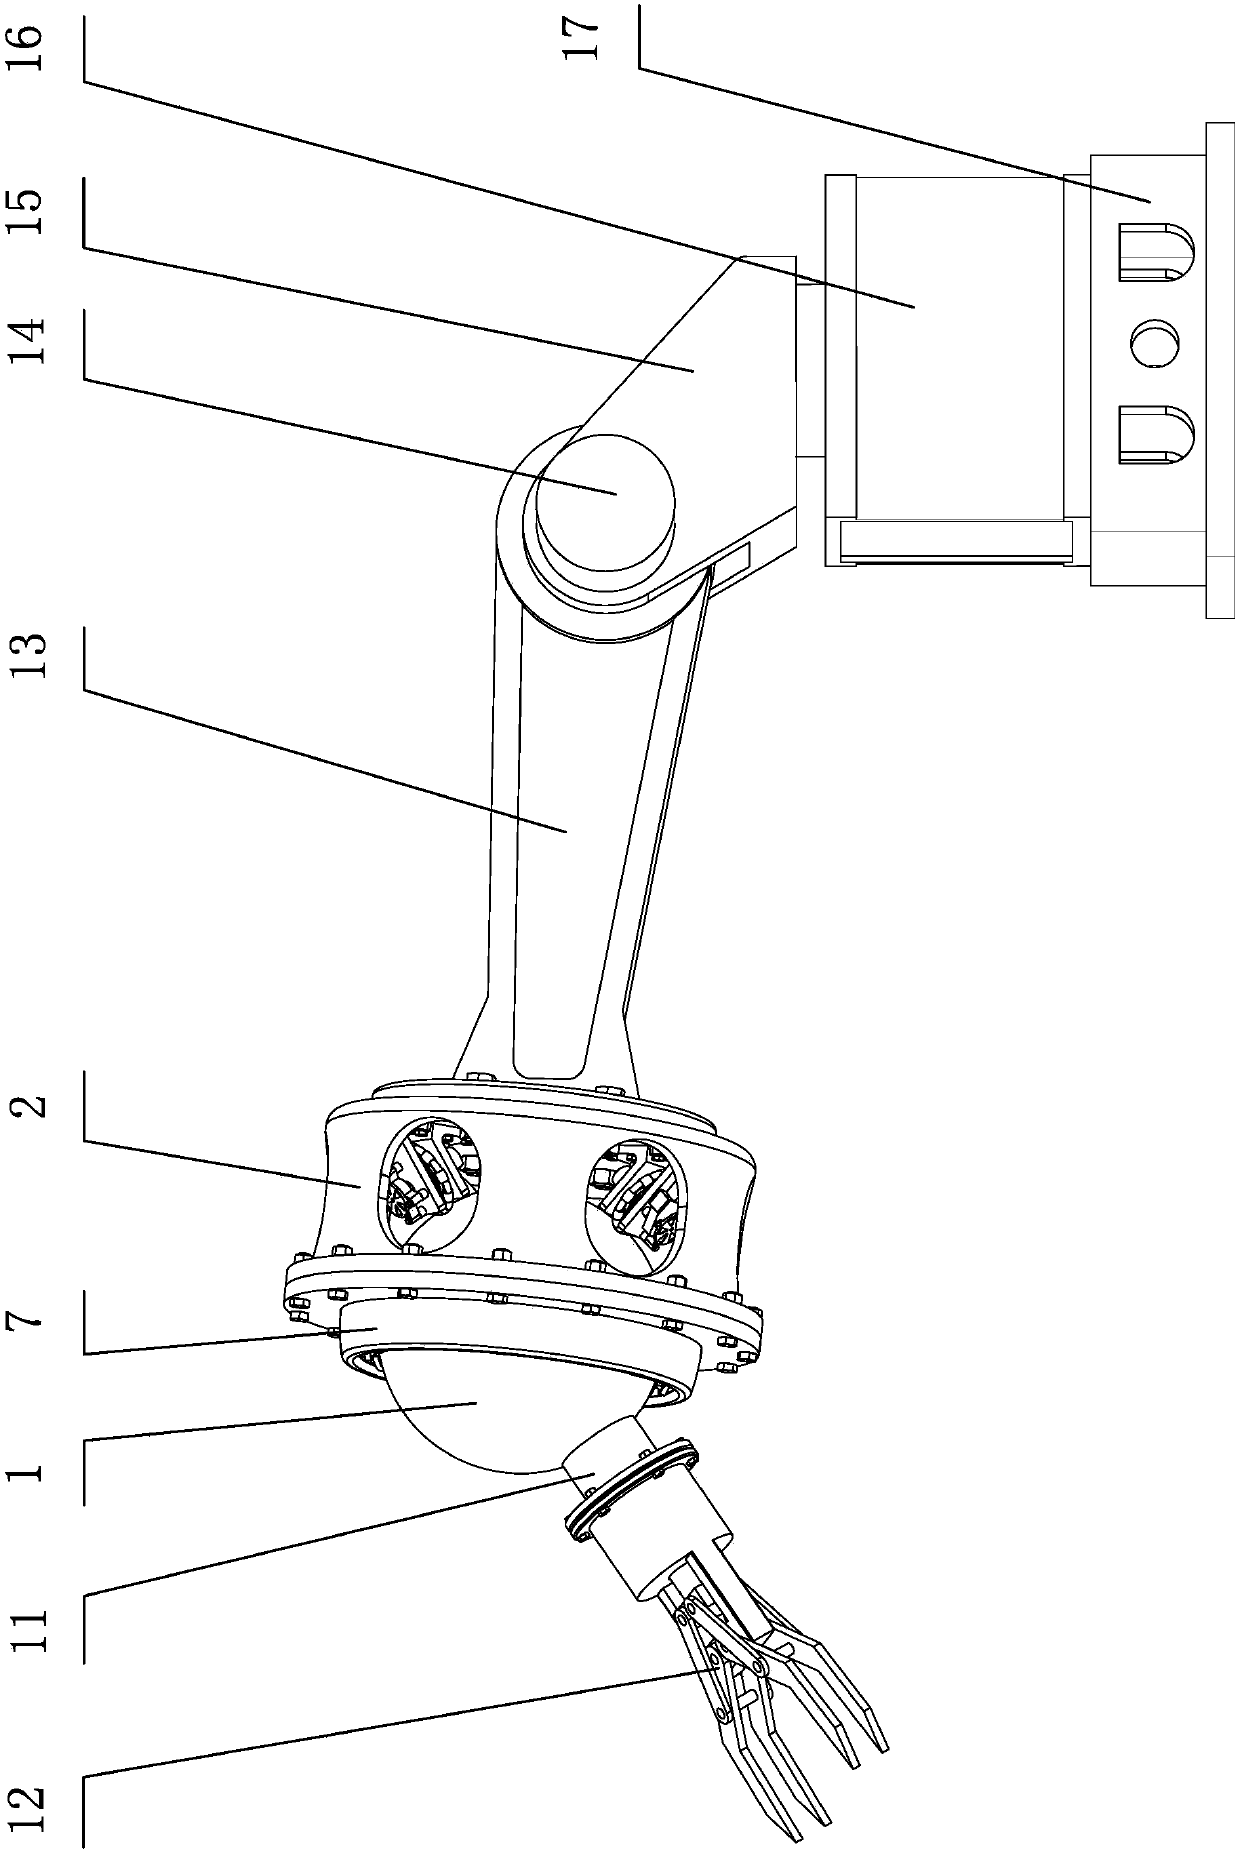 Robot wrist joint mechanism driven by omnidirectional wheels